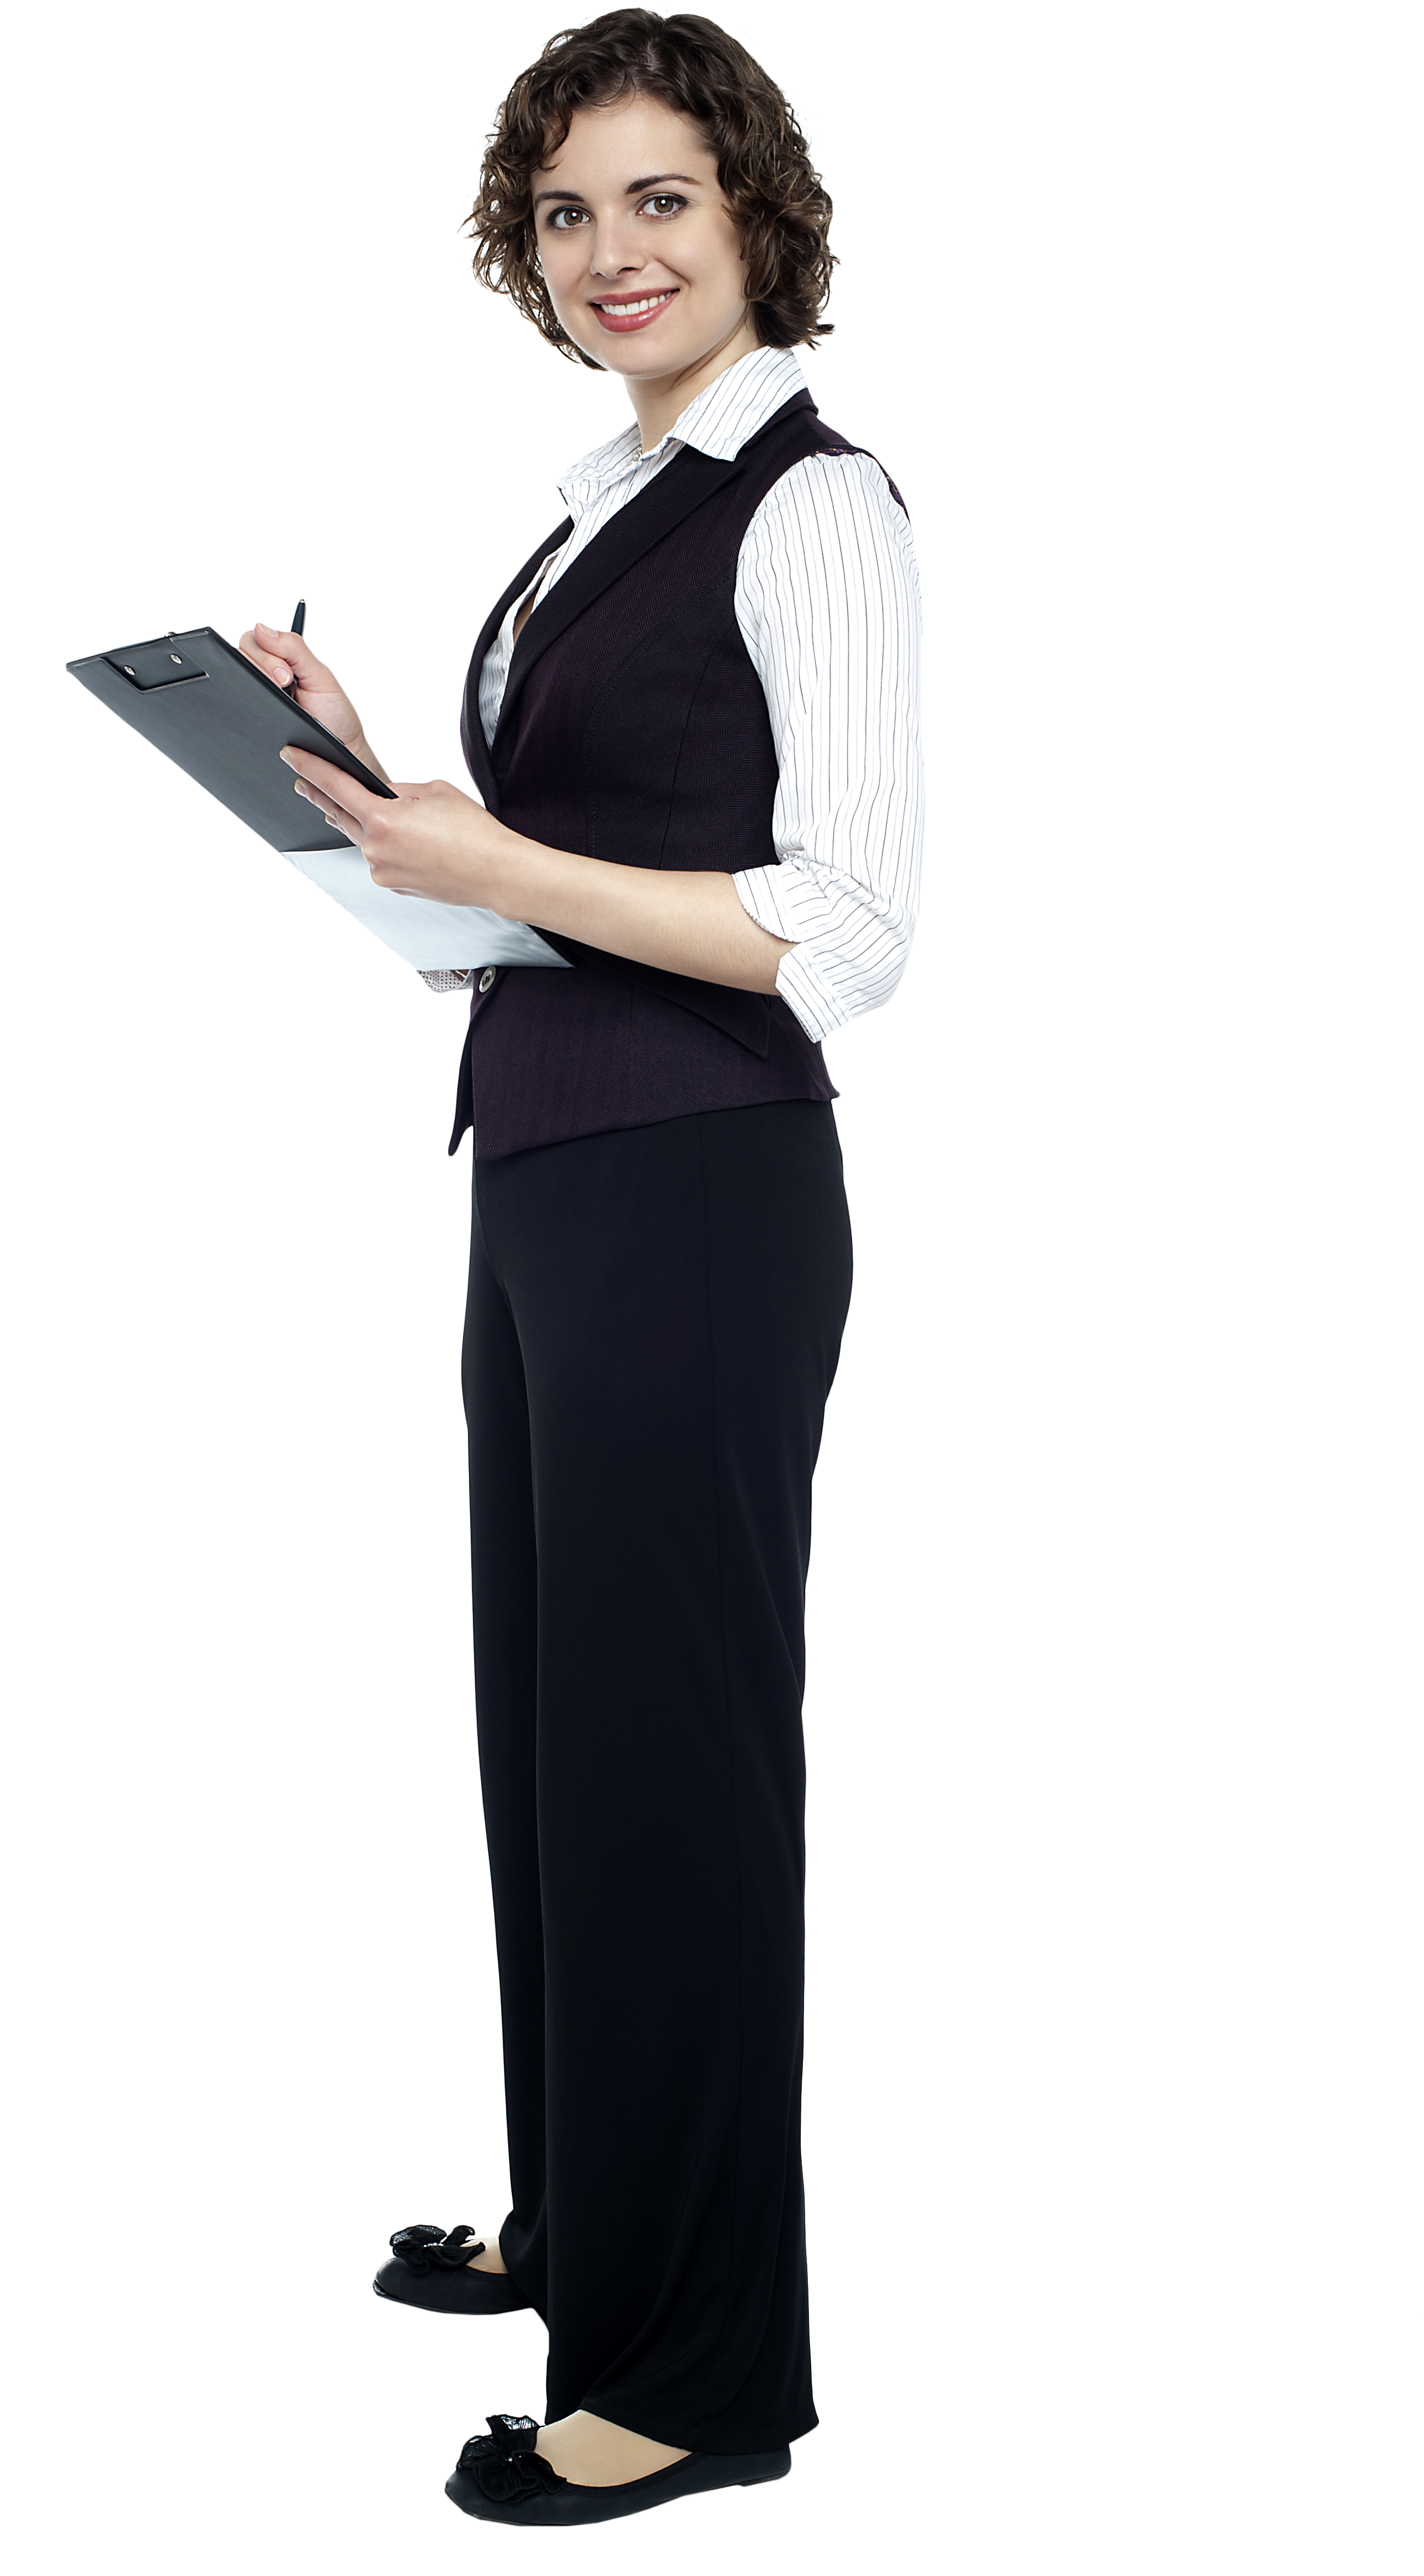 Professional Woman Holding Clipboard PNG